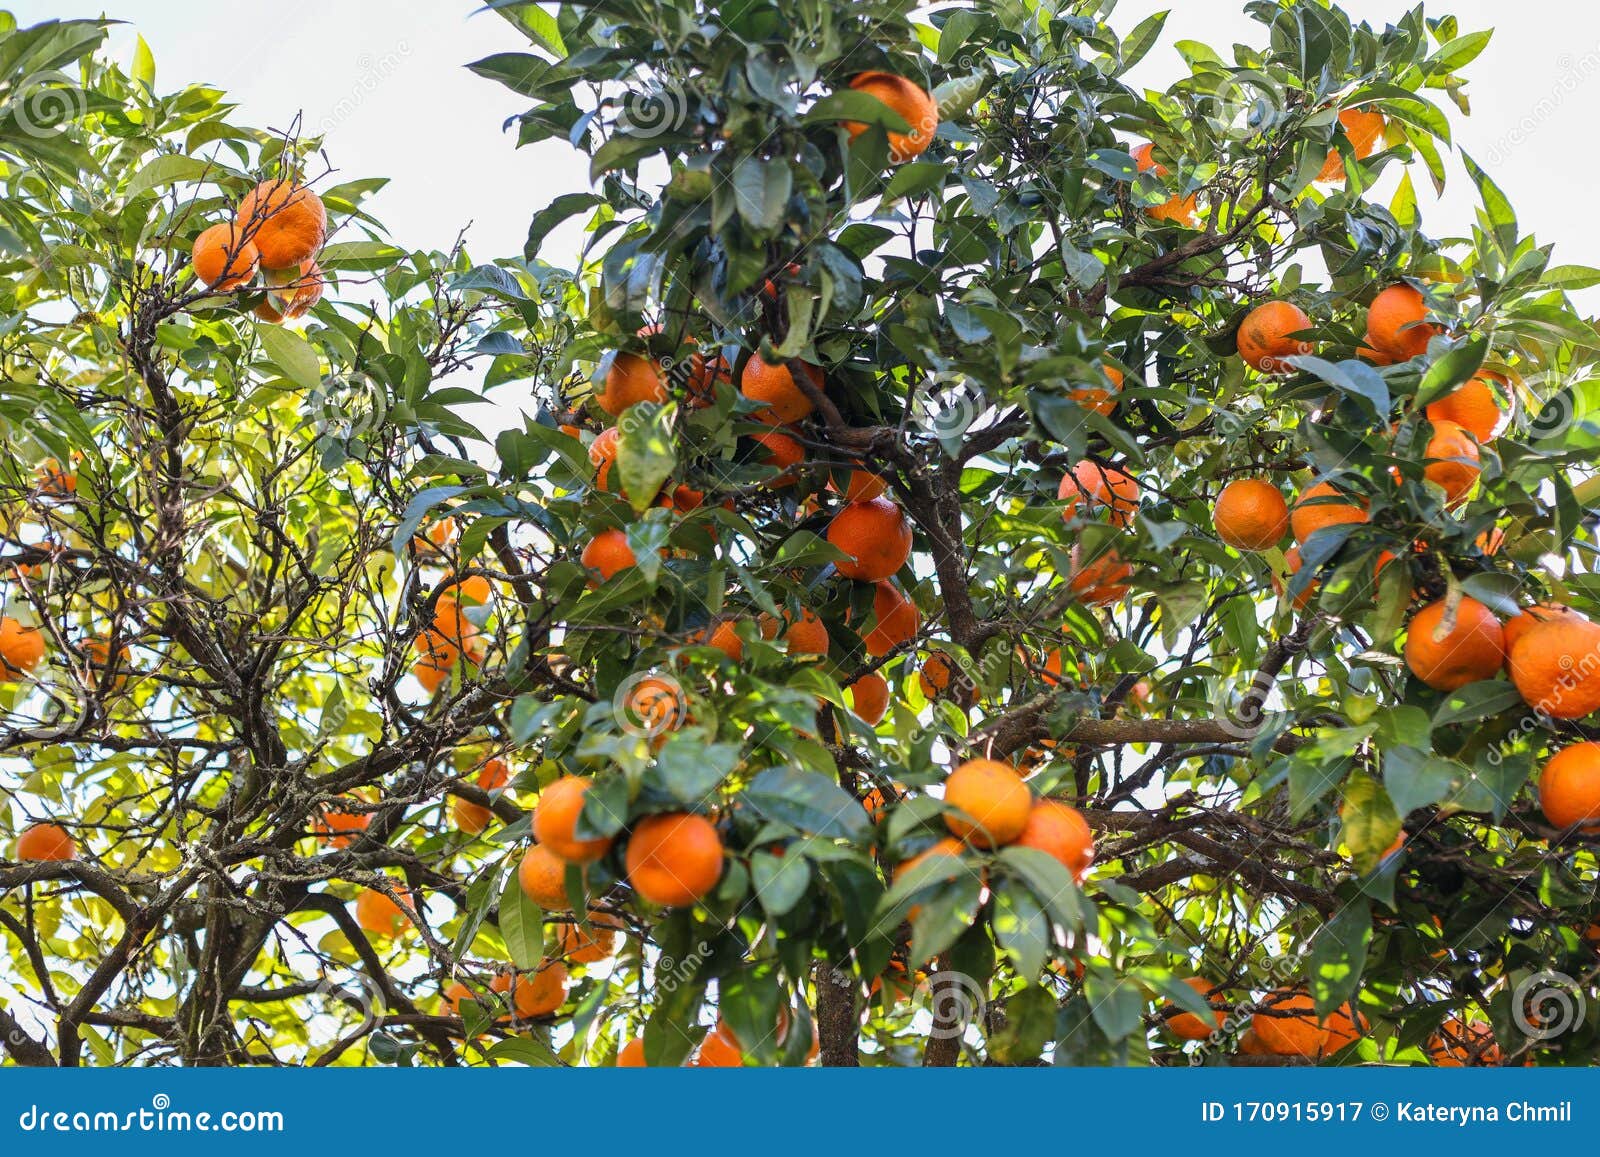 green tree with oranges in an orange grove in the garden